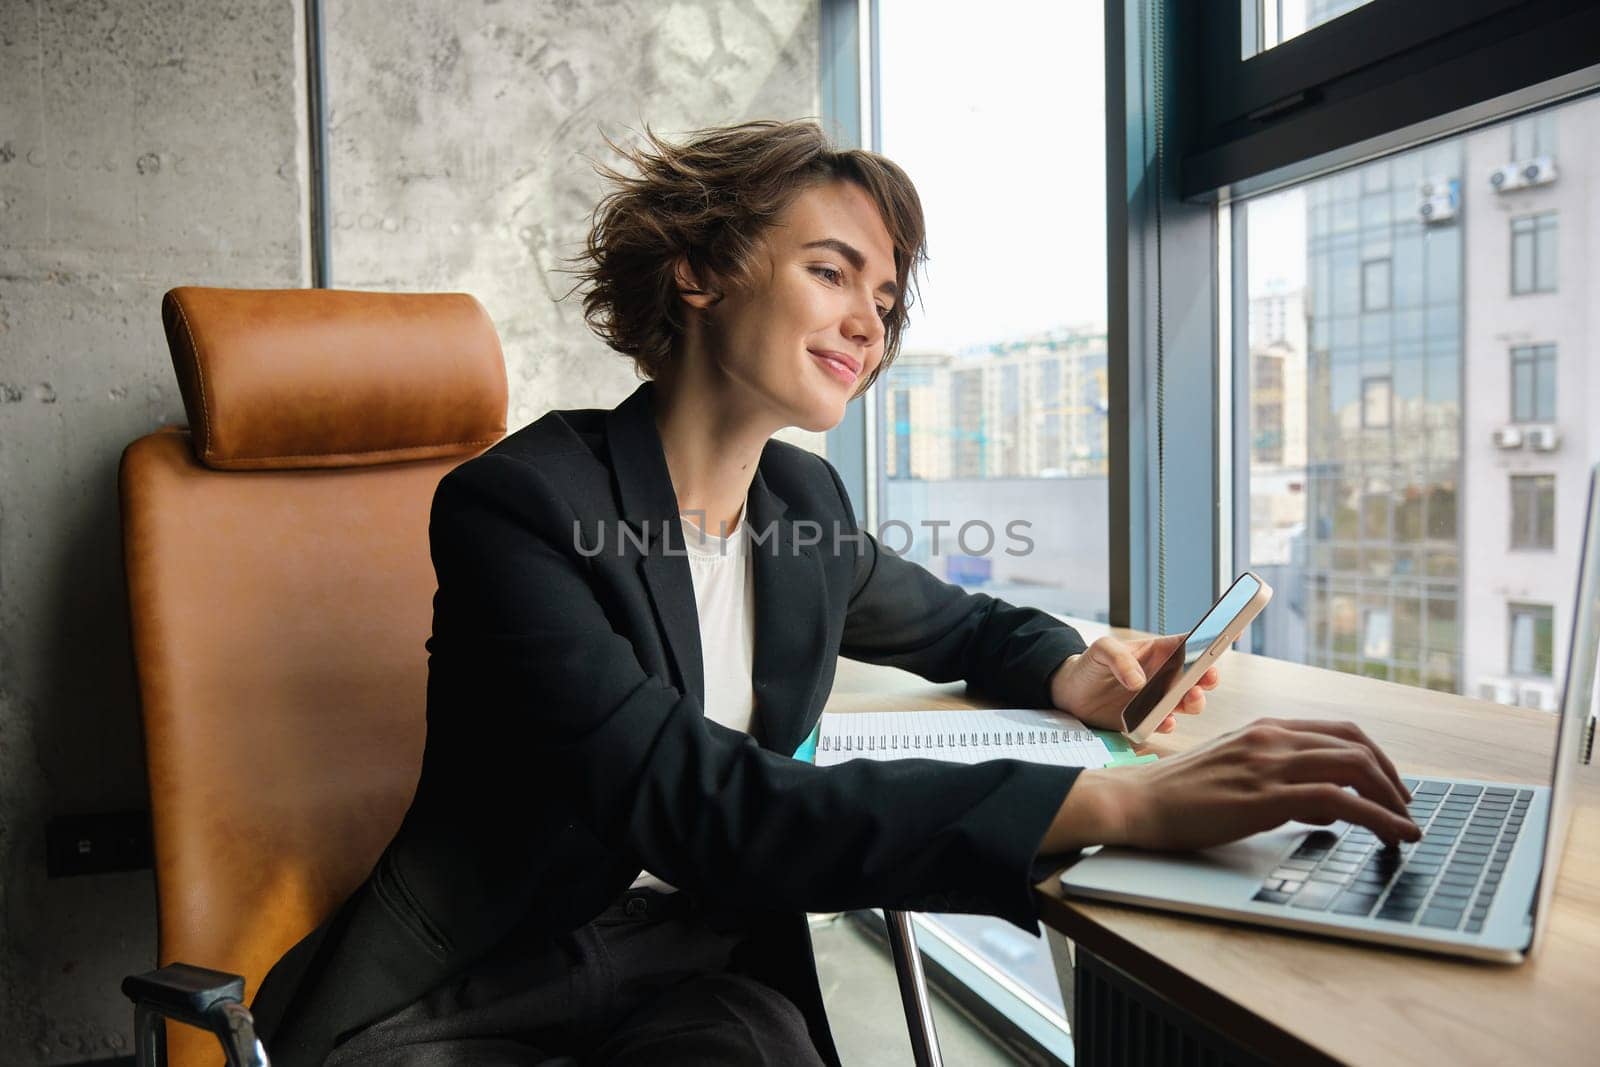 Young working woman in office, sitting in front of computer and using smartphone, wearing suit.